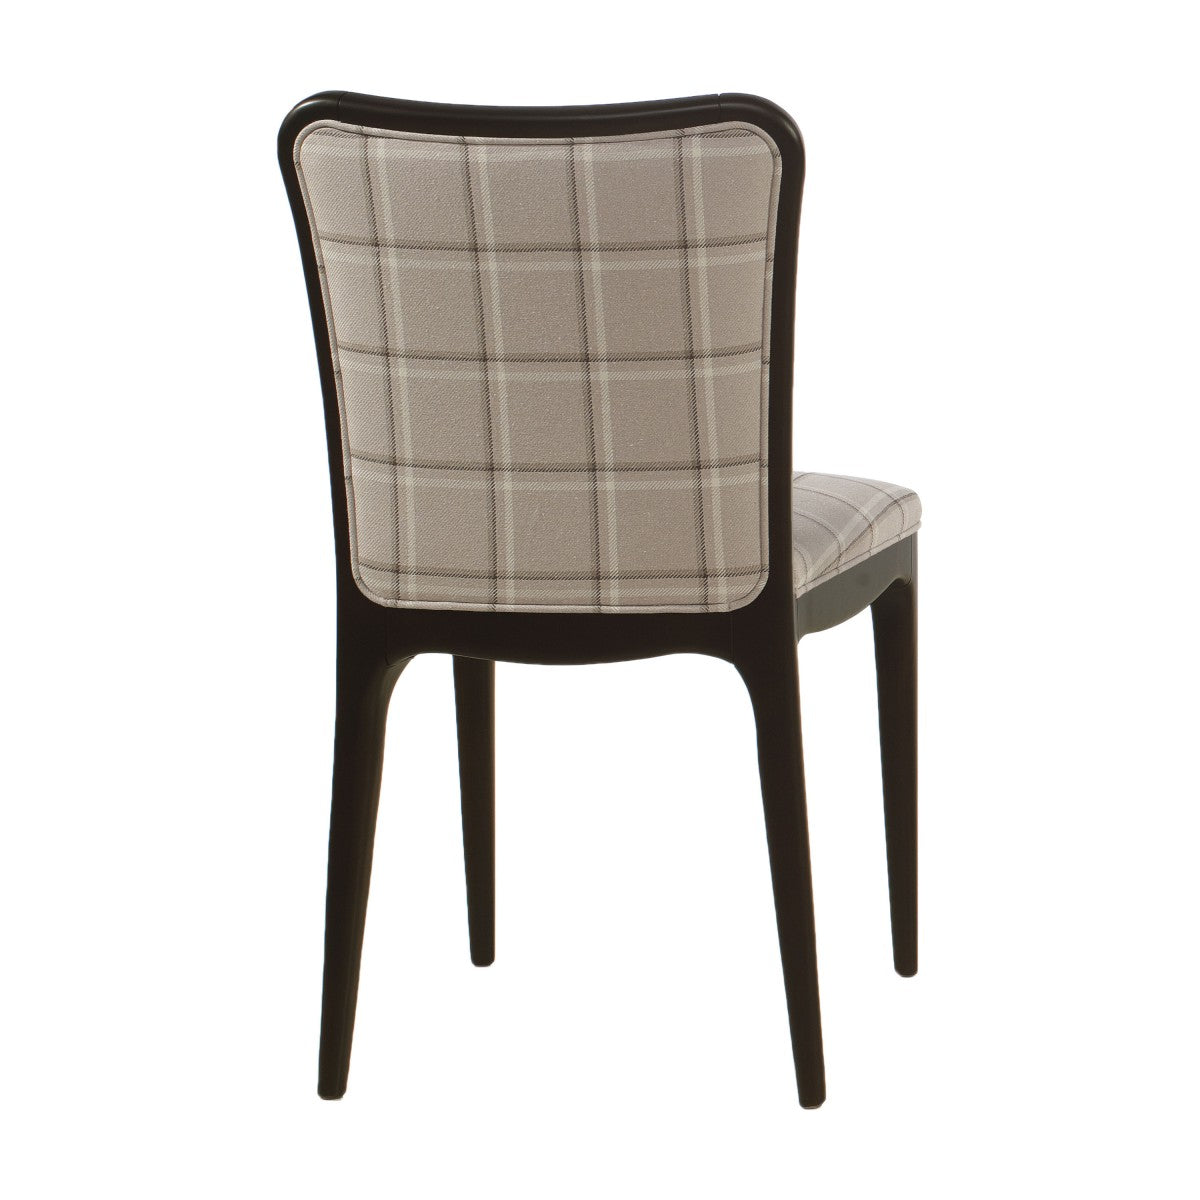 The Curve Bespoke Upholstered Fifties Retro Style Contemporary Dining Chair MS98S Custom Made To Order